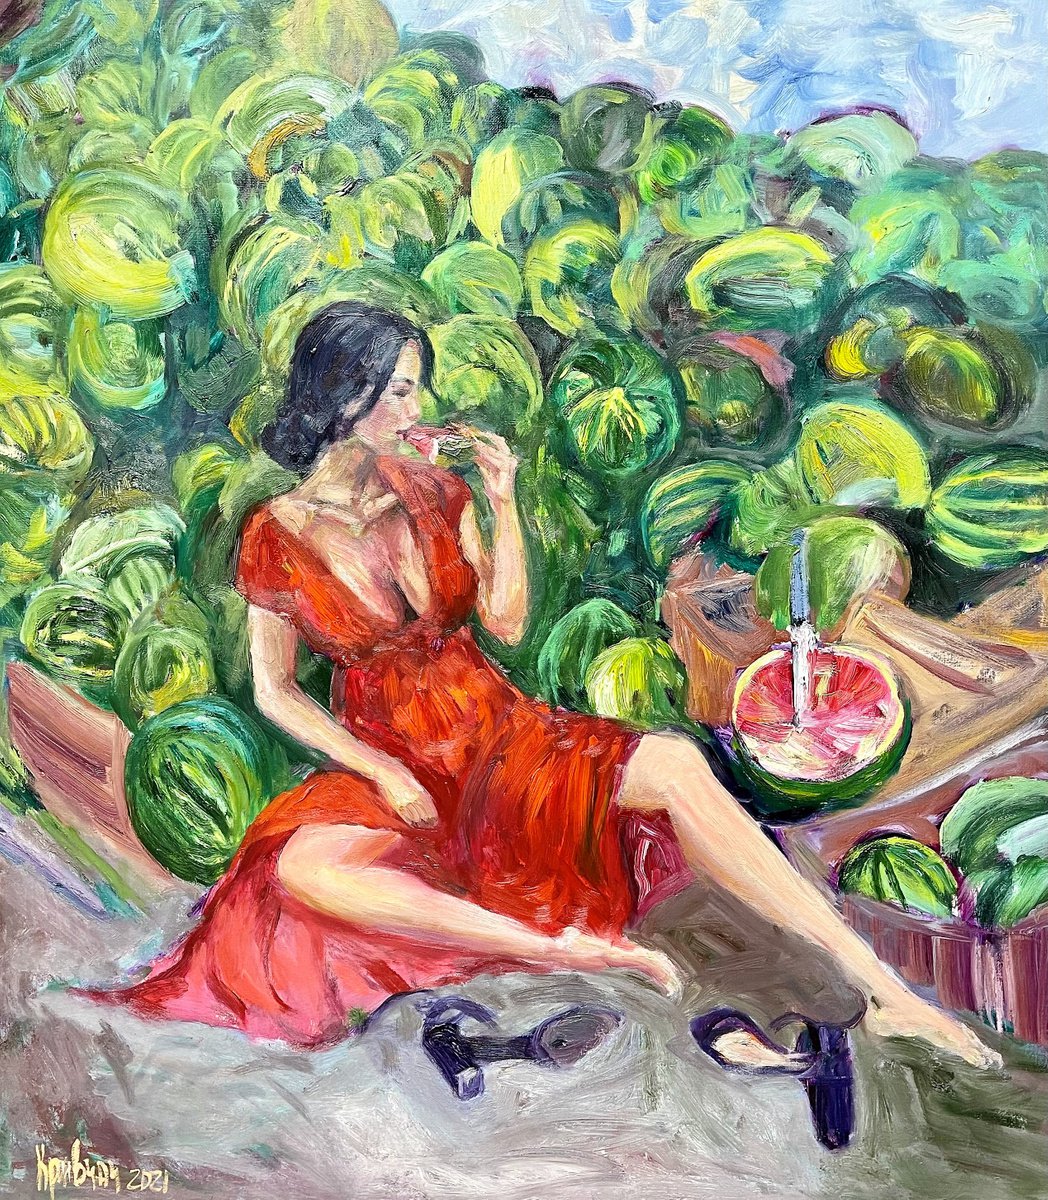 Girl with watermelons by Kateryna Krivchach